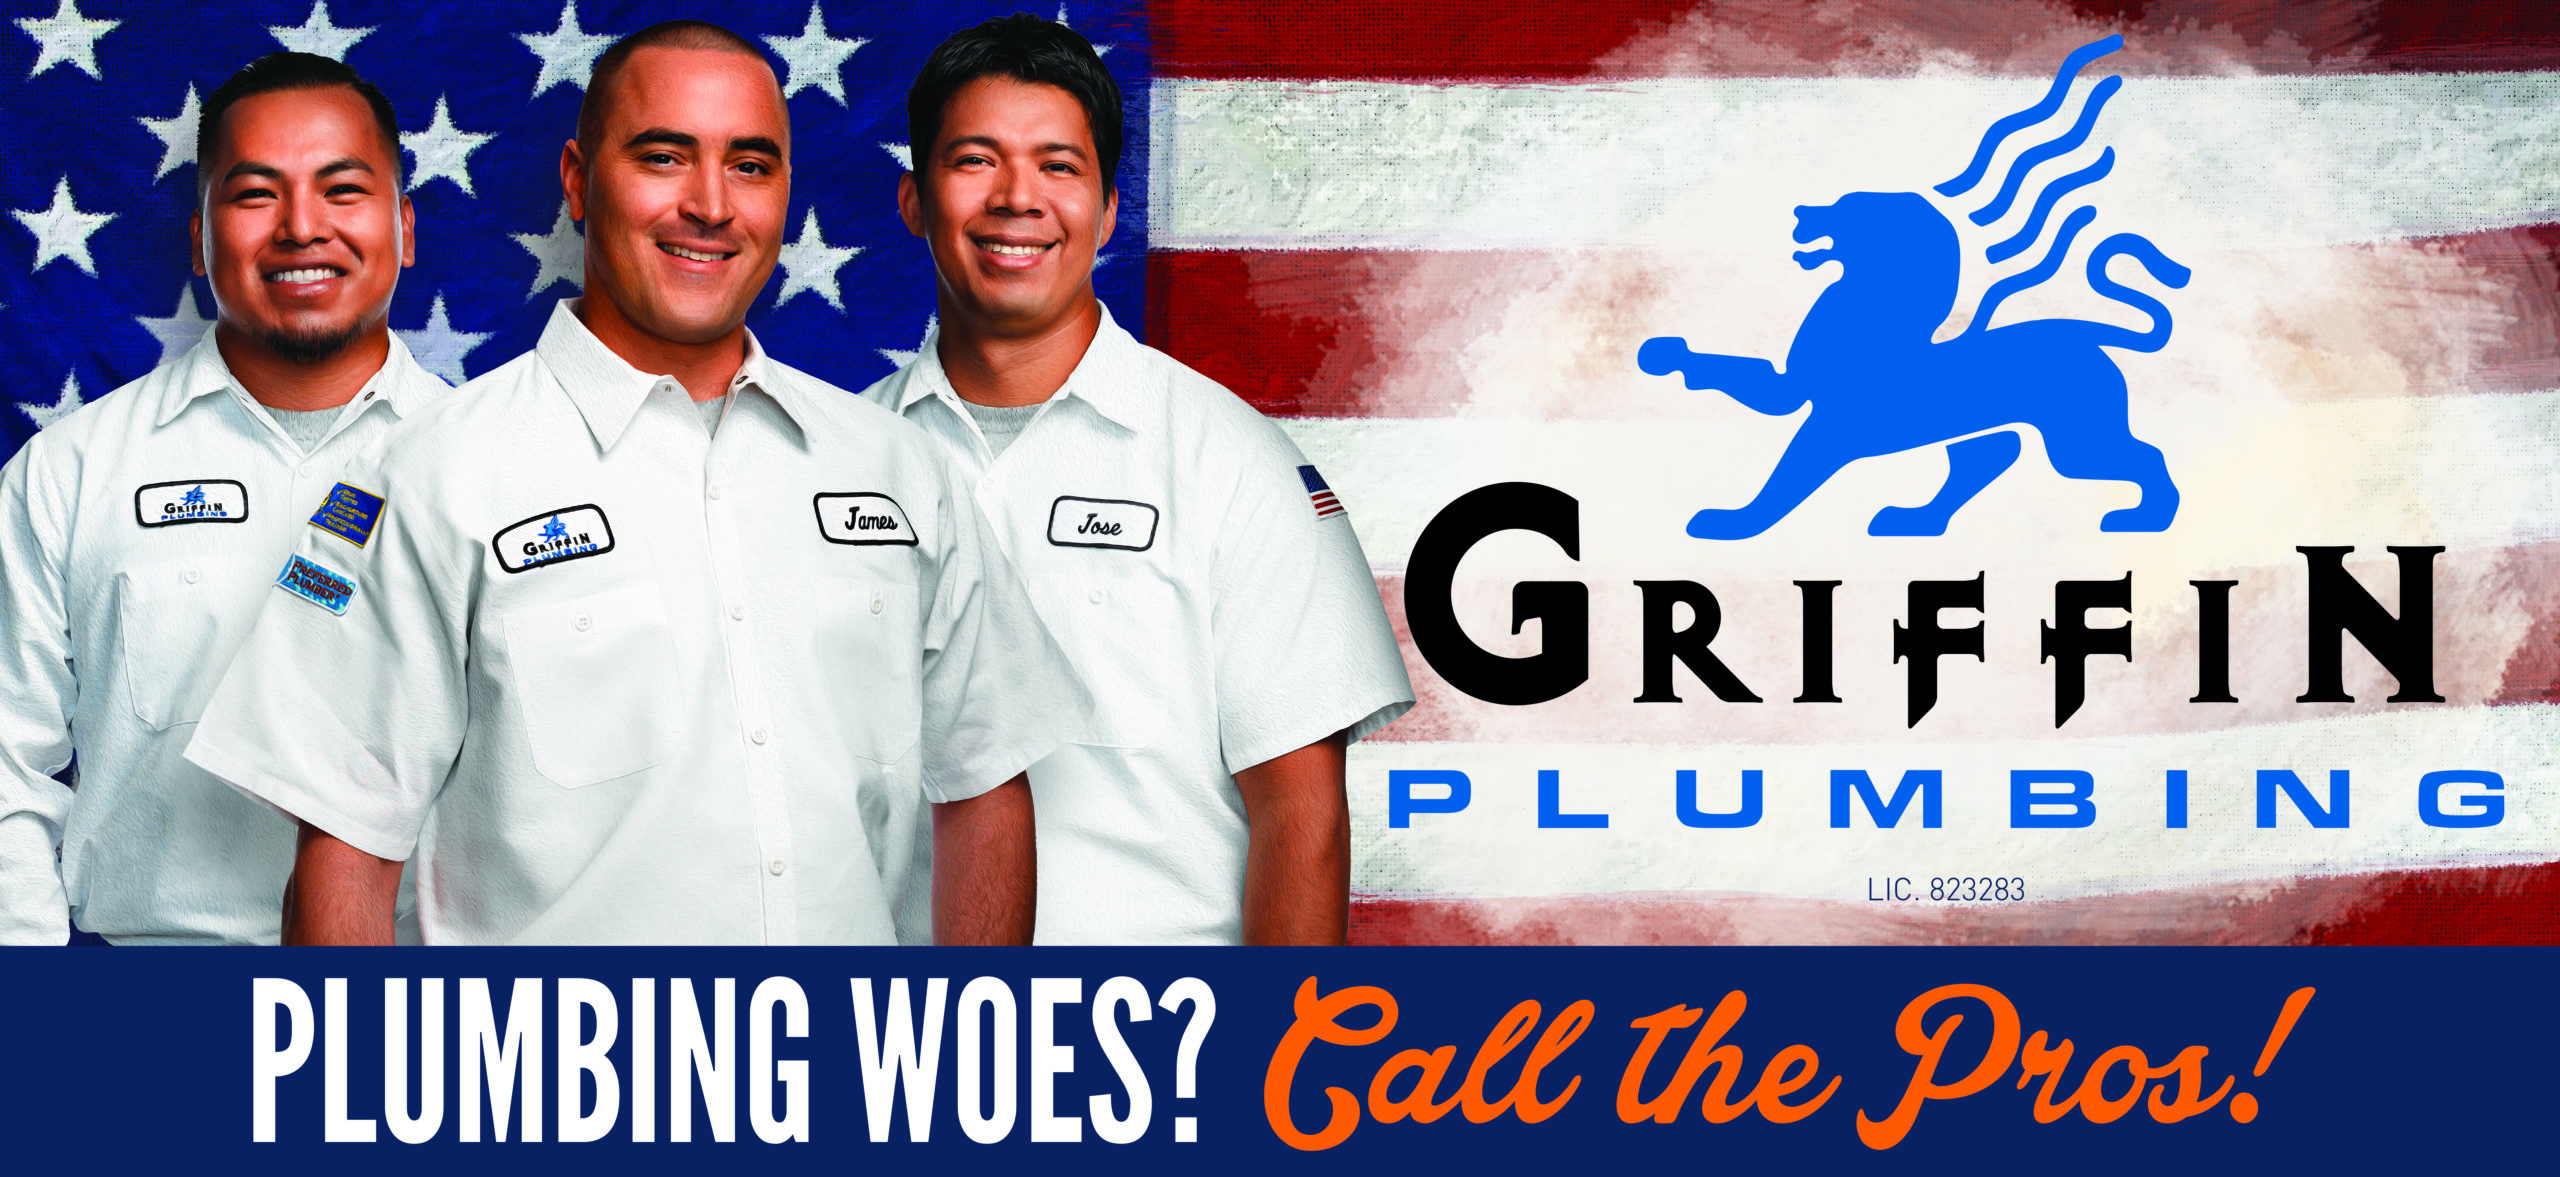 Our Central Coast Plumbing Pros